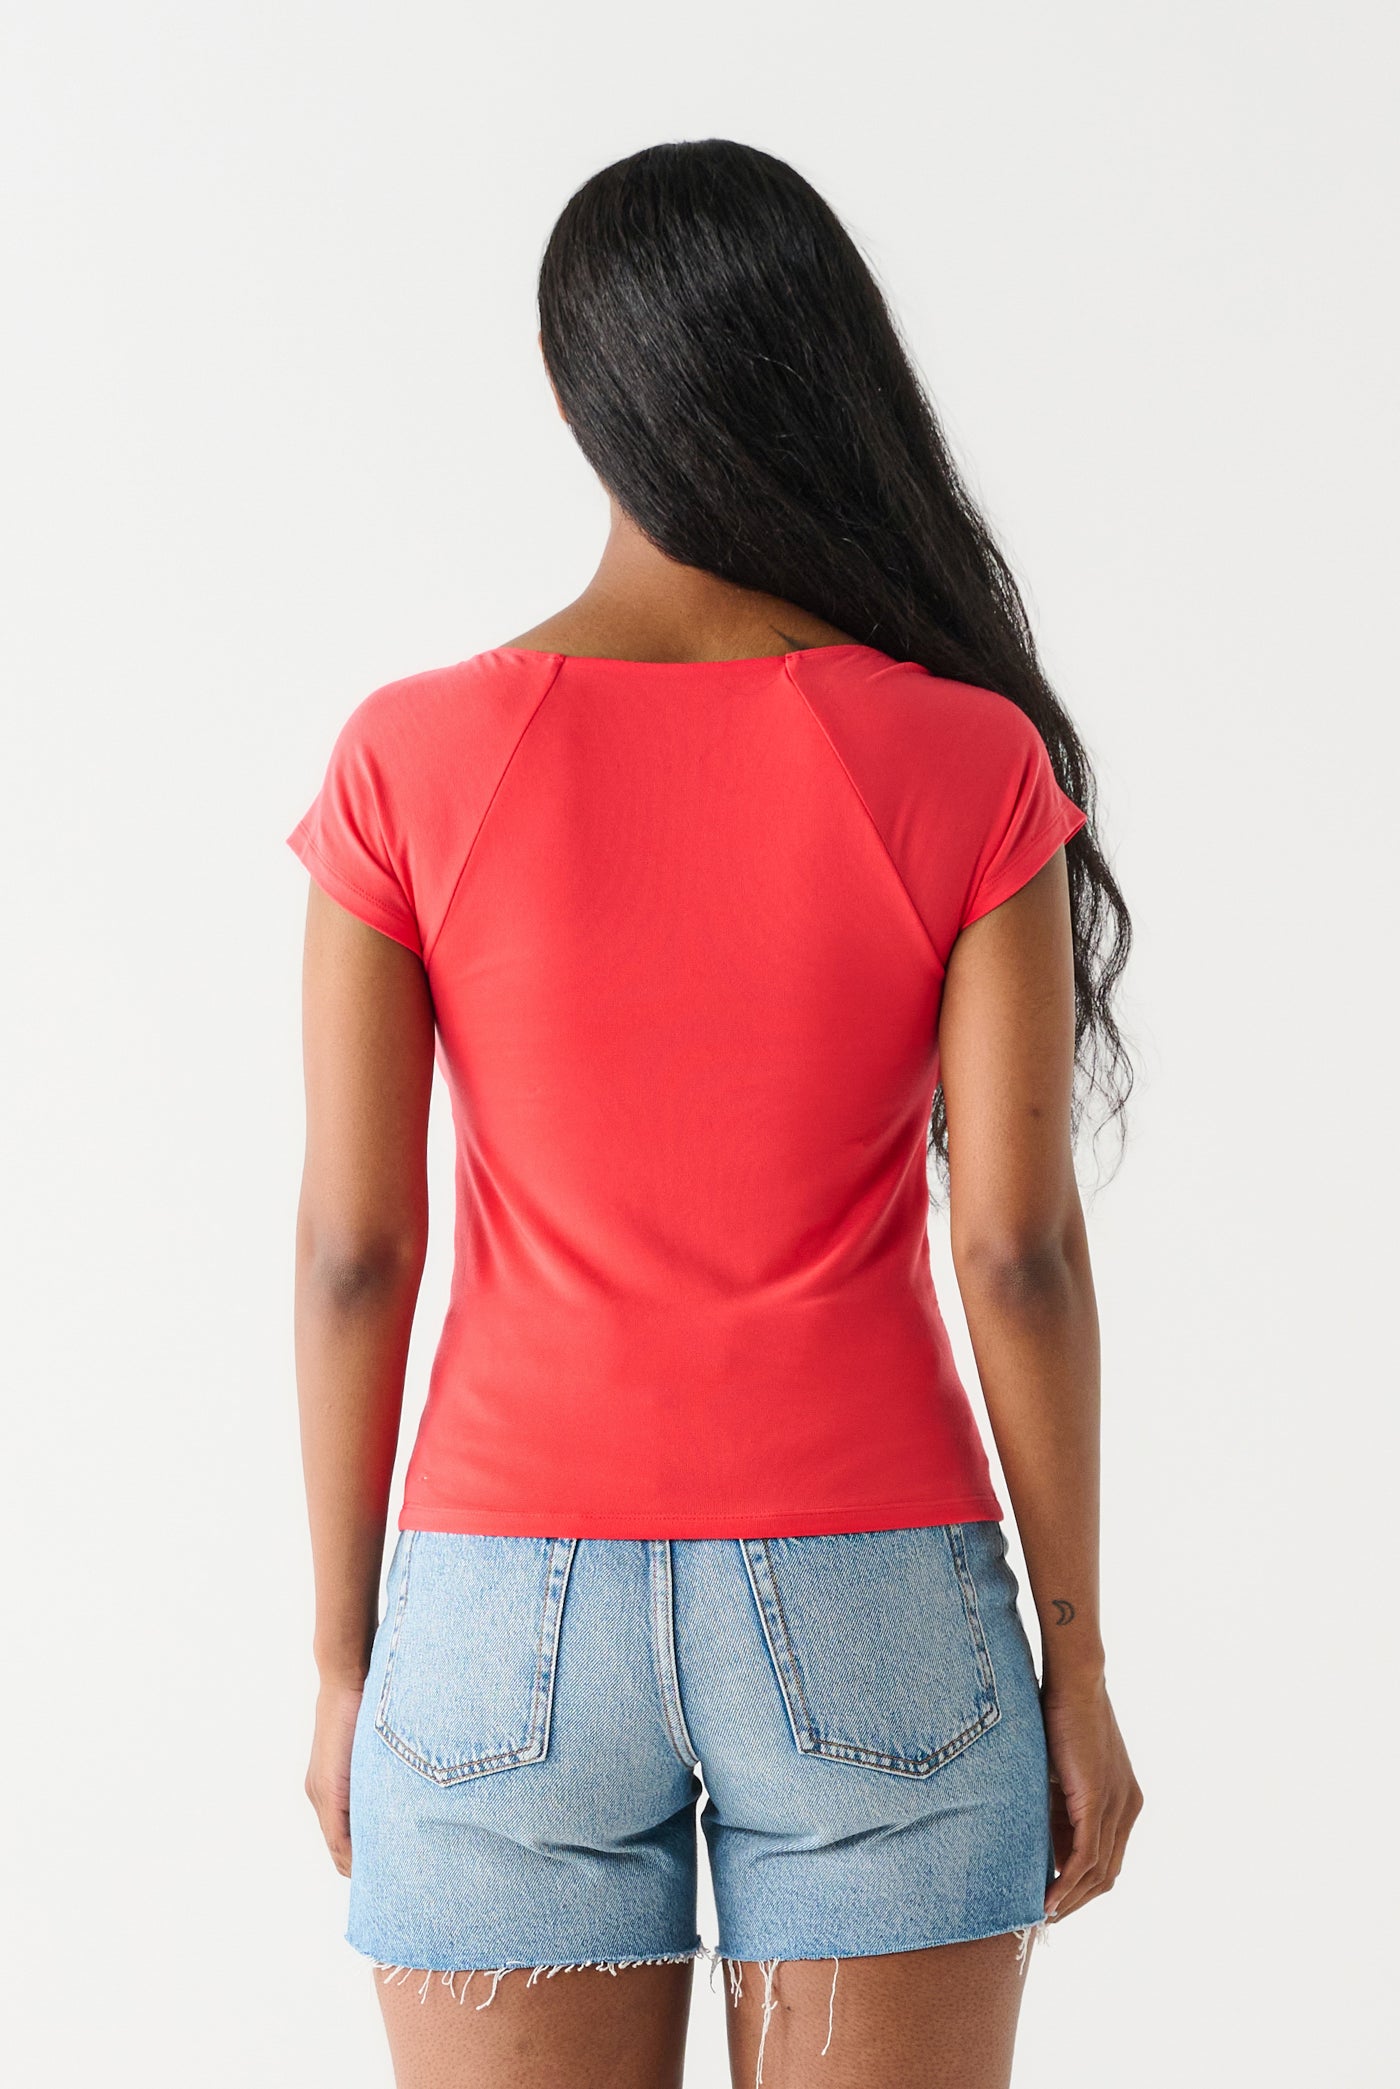 Sweetheart Top-Short Sleeves-Vixen Collection, Day Spa and Women's Boutique Located in Seattle, Washington